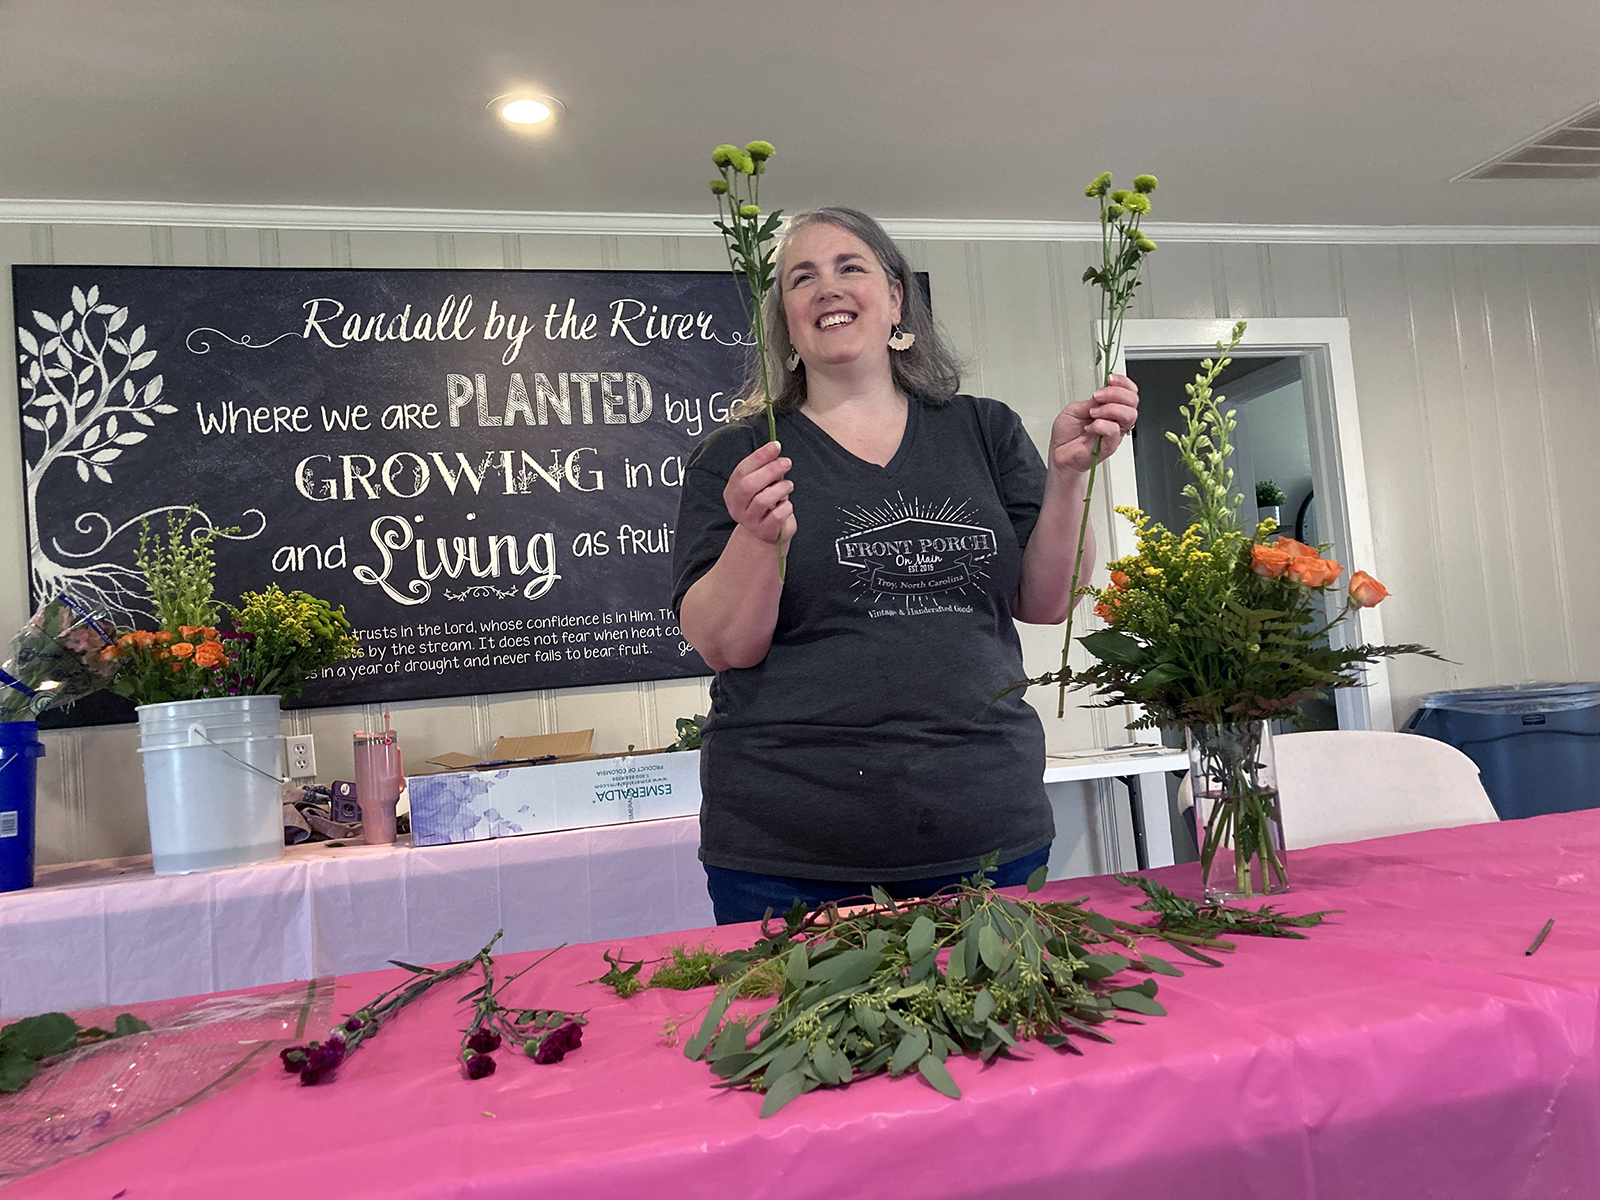 Melanie Nichols, a florist instructor from Troy, North Carolina, leads a flower arrangement class, Saturday, April 13, 2024, at Randall by the River in Norwood, North Carolina. (RNS photo/Yonat Shimron)